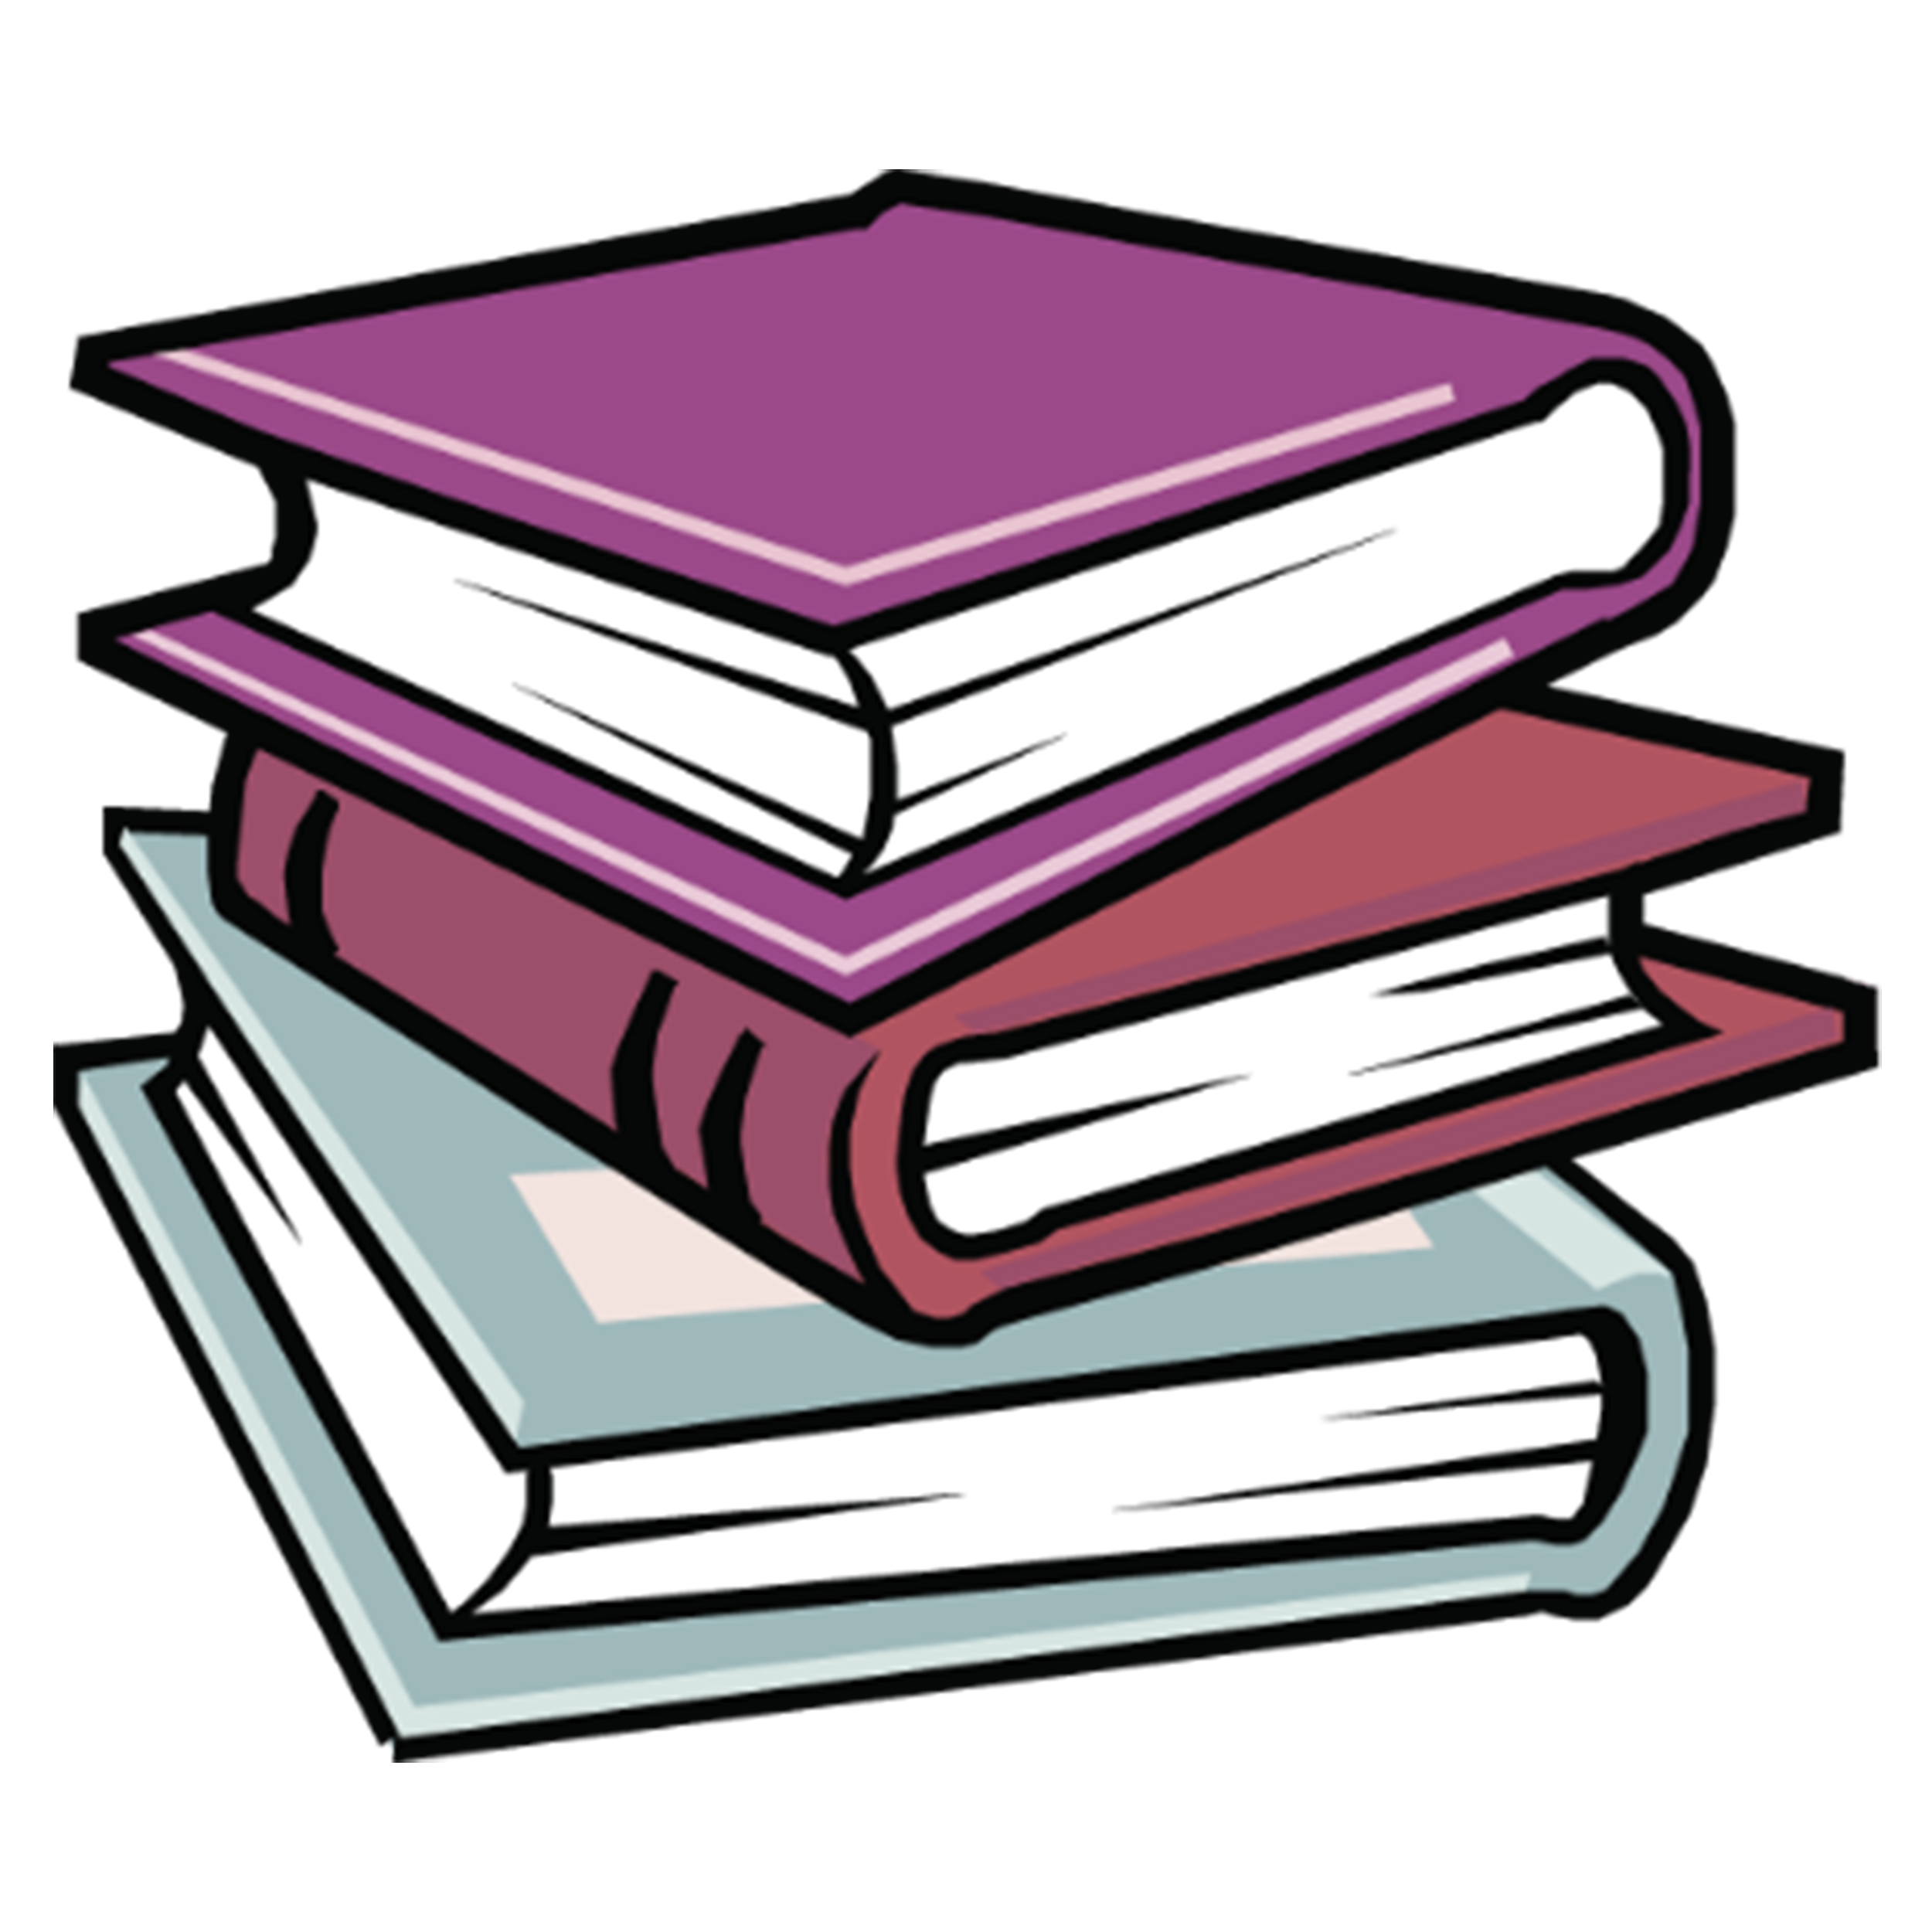 Book Clip Art Books Png Image With Transparency Background Png - Gambaran